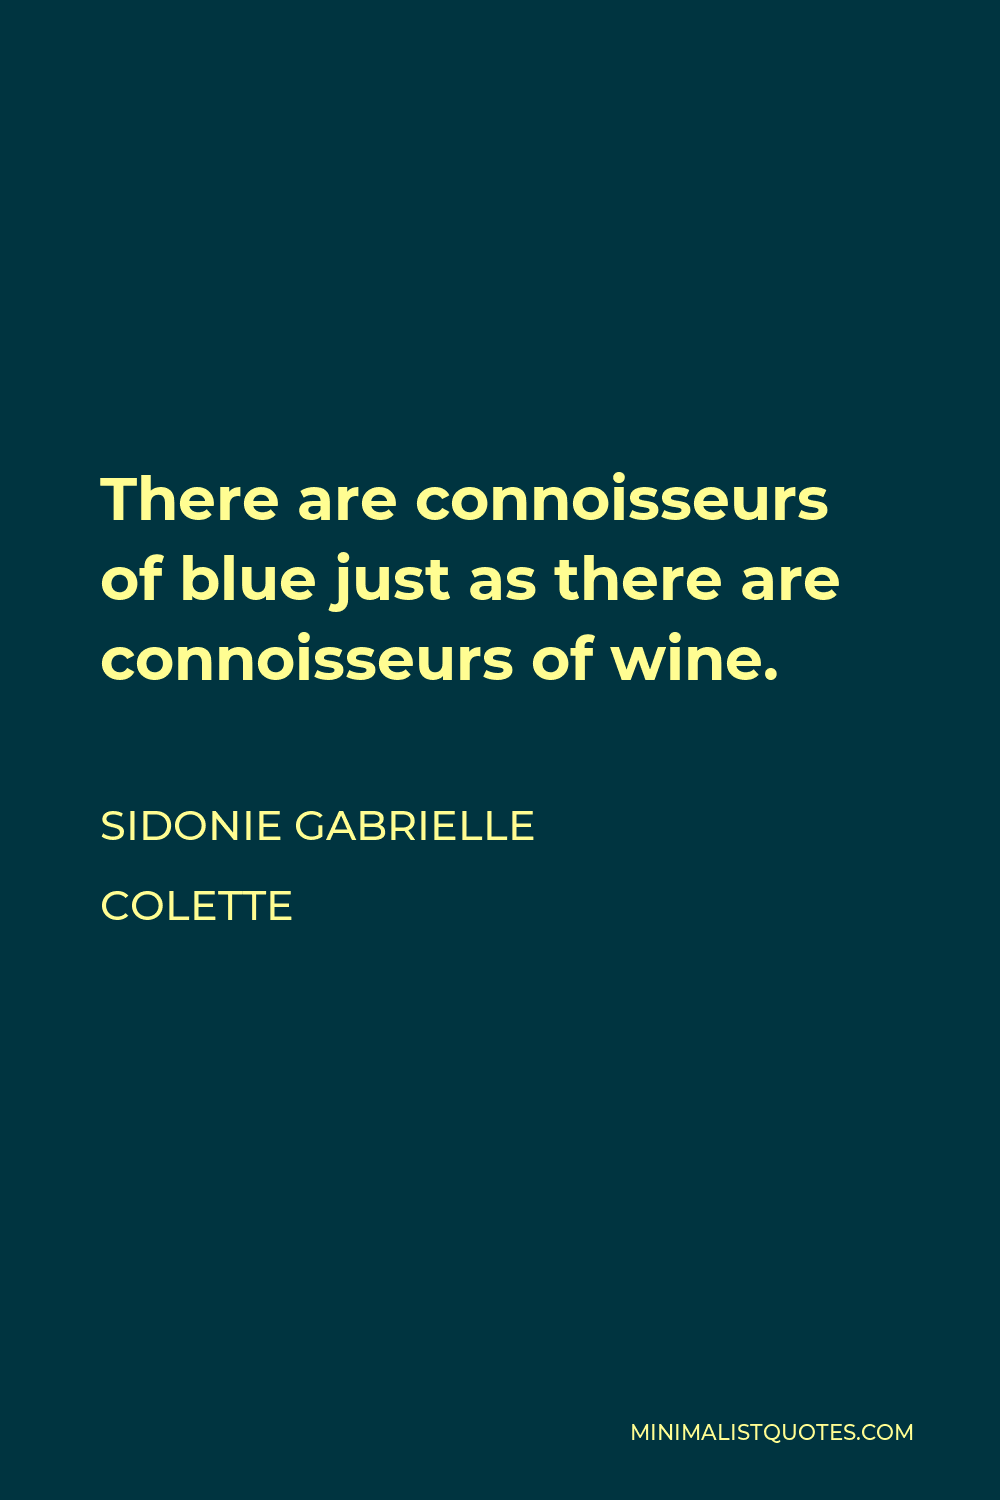 Sidonie Gabrielle Colette Quote - There are connoisseurs of blue just as there are connoisseurs of wine.